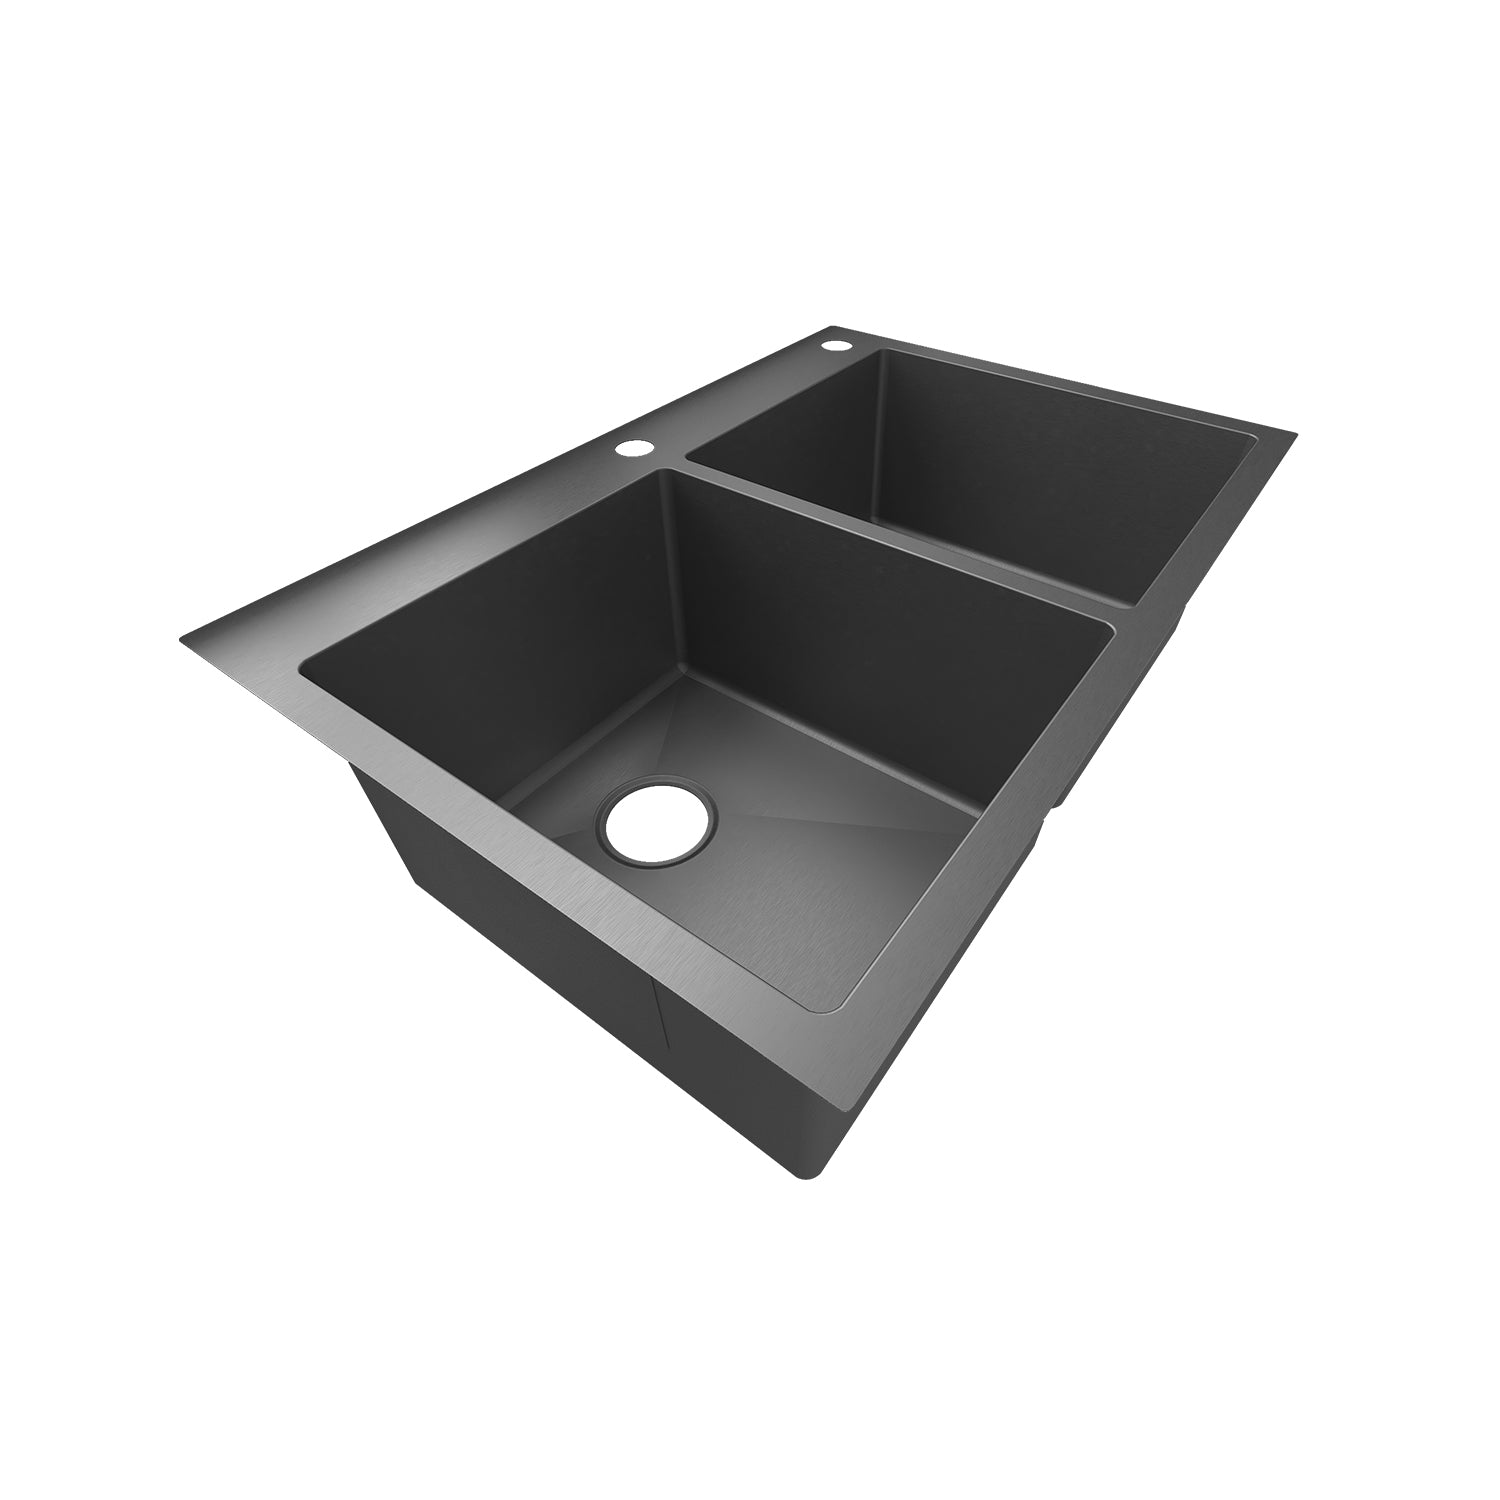 Sinber 33" x 22" x 9" Drop In Double Bowl Kitchen Sink with 18 Gauge 304 Stainless Steel Black Finish HT3322D-B (Sink Only)